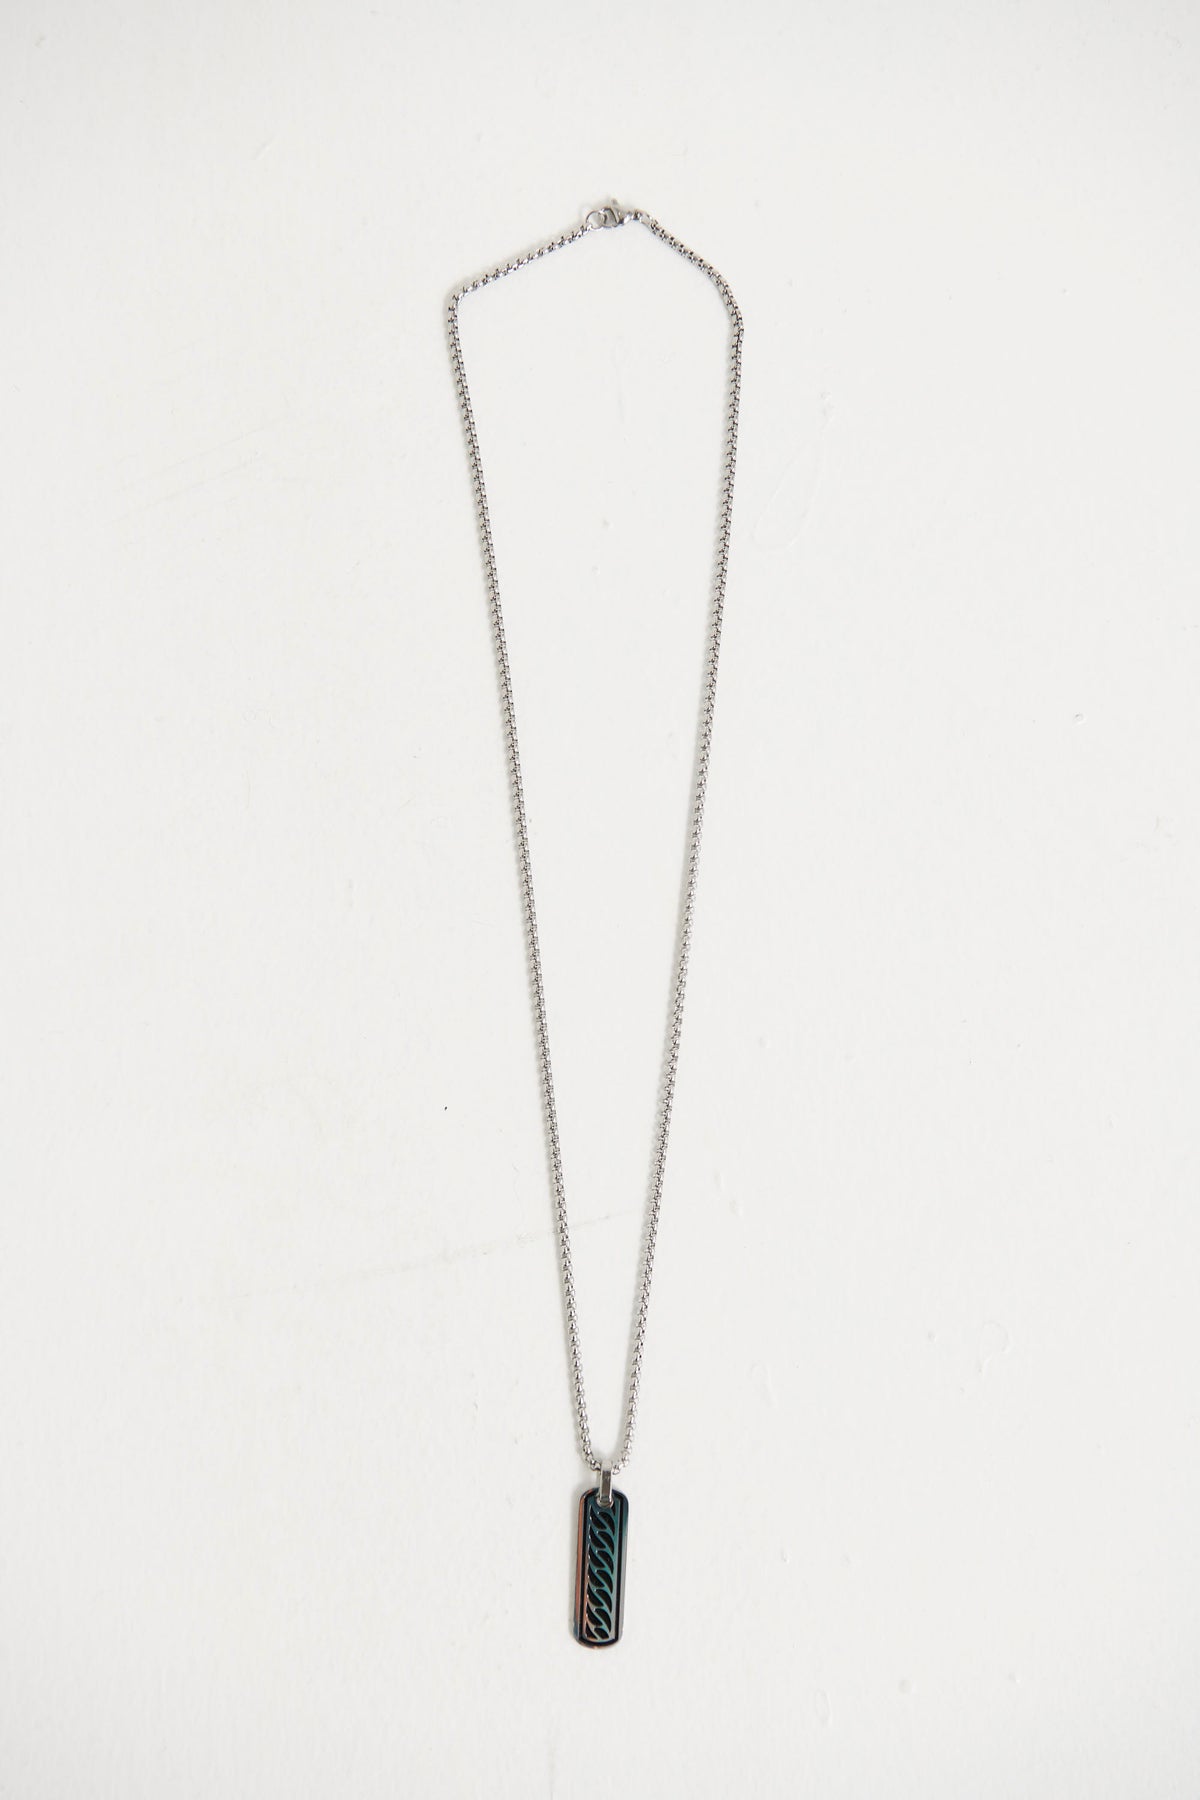 NTH Pendant Necklace Silver